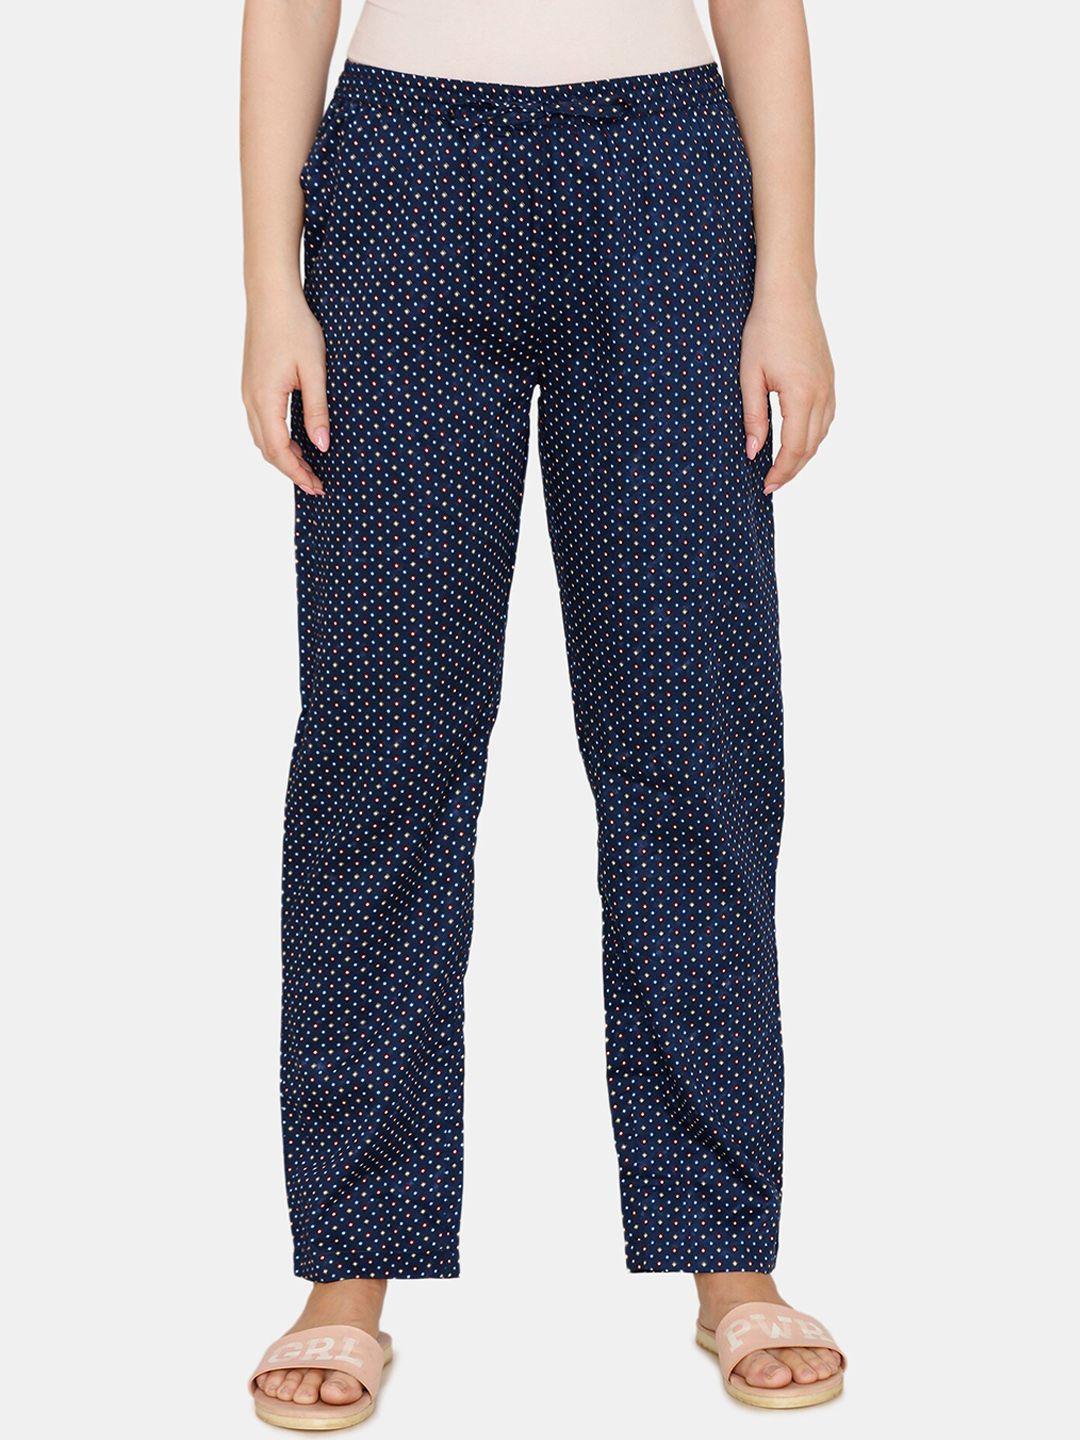 coucou by zivame women navy blue polka dots printed cotton lounge pants